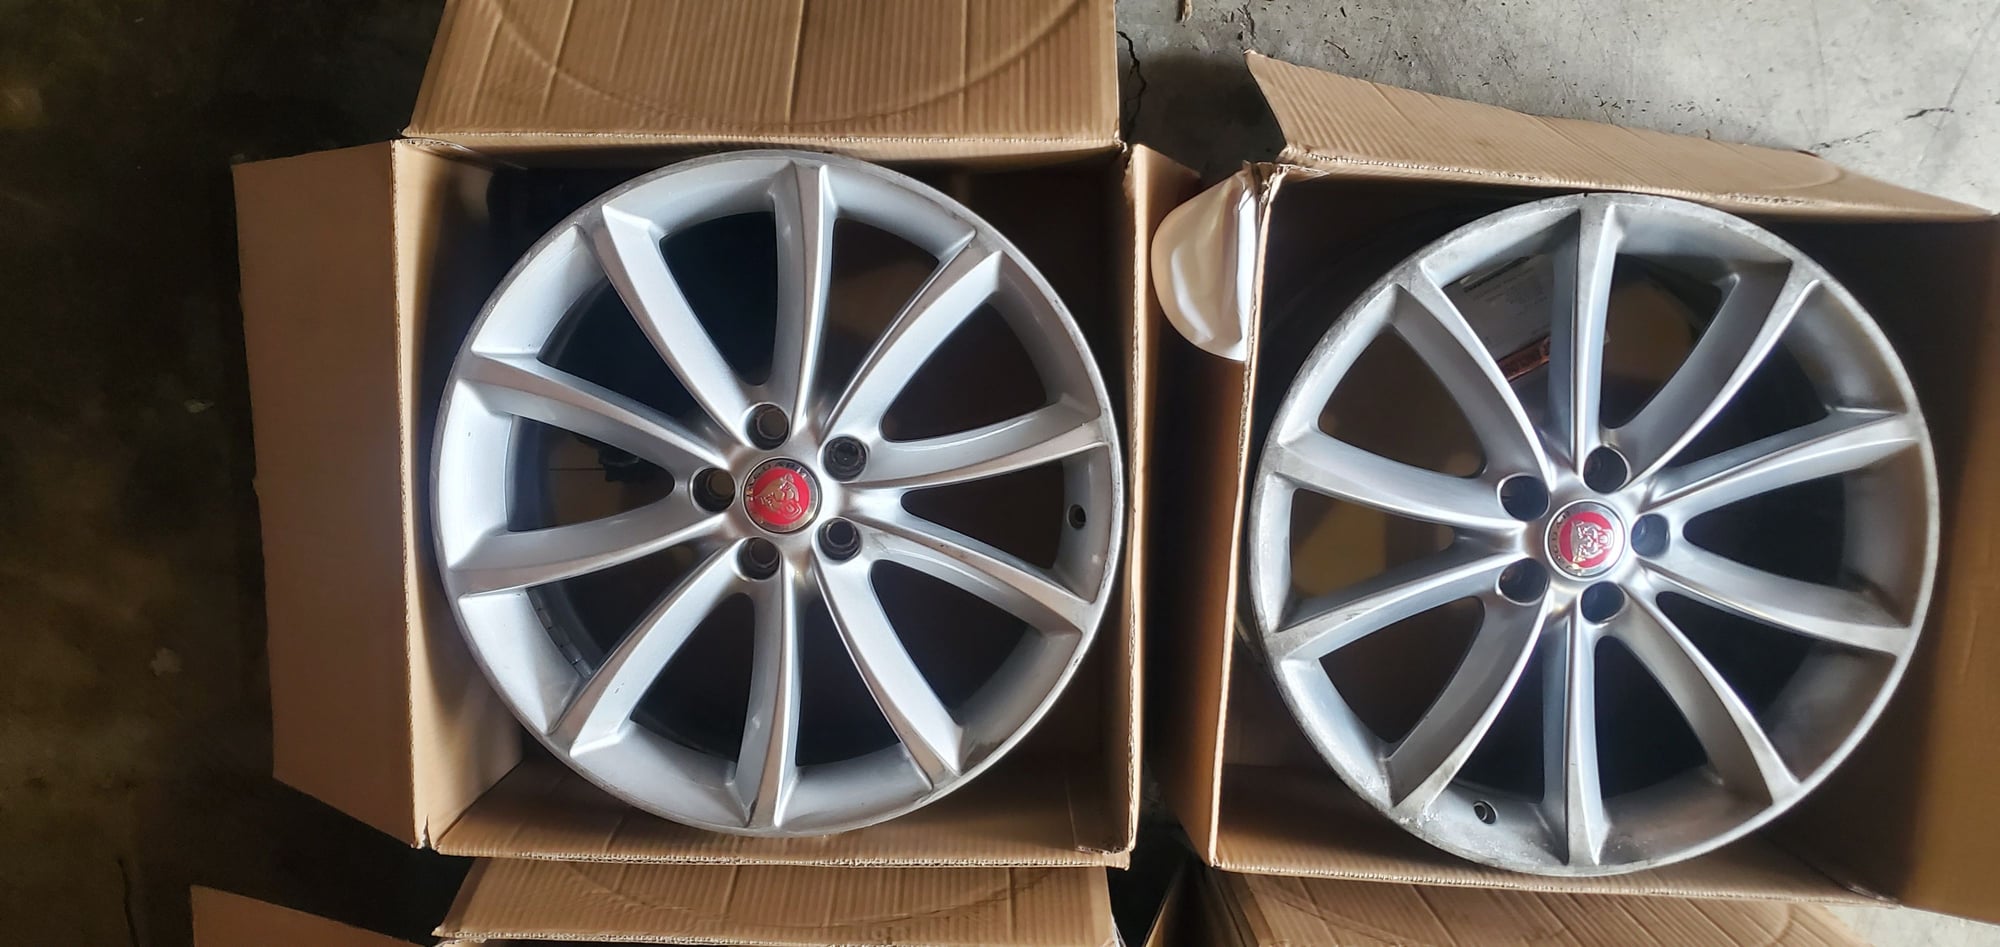 Wheels and Tires/Axles - 19 inch XF 2016 Rims for Sale. 400!! - Used - All Years Any Make All Models - Phillips Ranch, CA 91766, United States